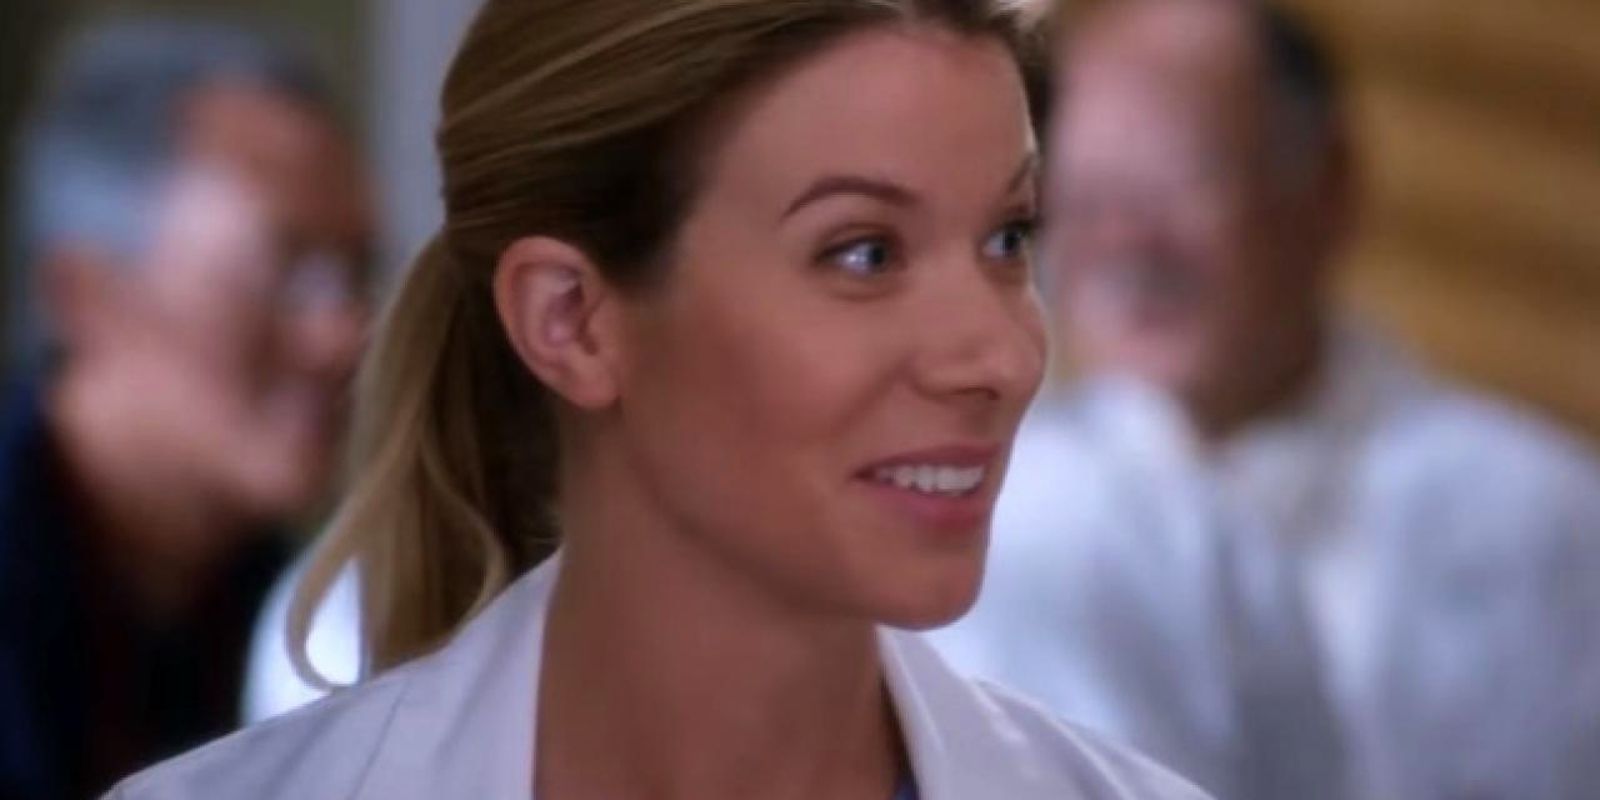 Tessa Ferrer as Dr. Leah Murphy smiling while wearing a white doctor's coat.